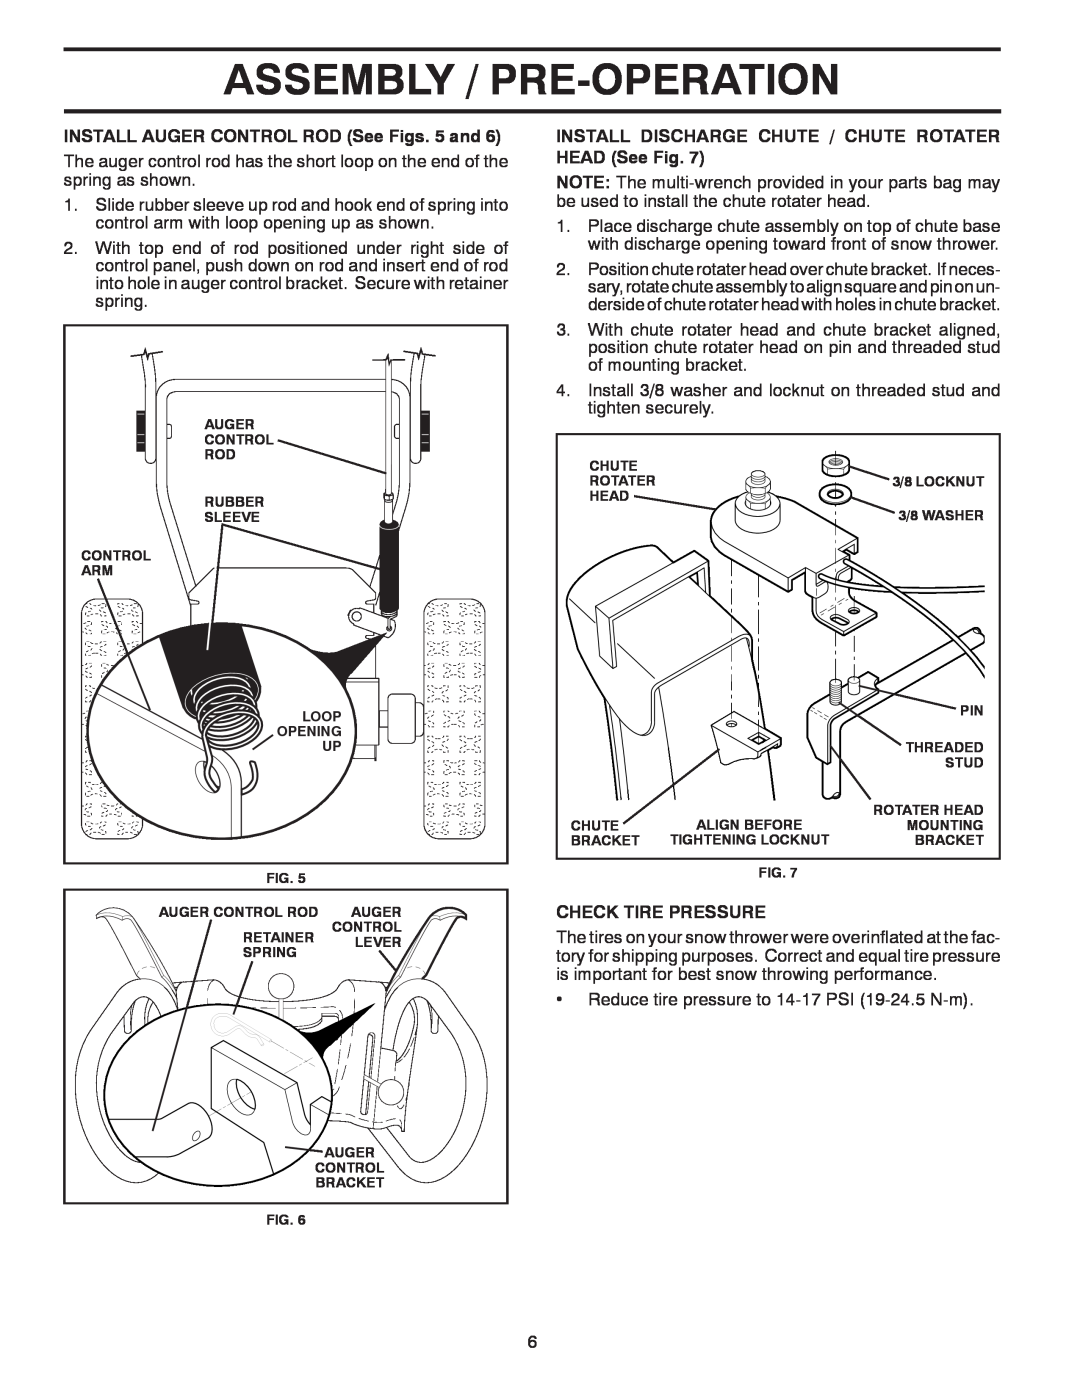 Poulan 424704, PR5524ESLCT Assembly / Pre-Operation, INSTALL AUGER CONTROL ROD See Figs. 5 and, Check Tire Pressure 